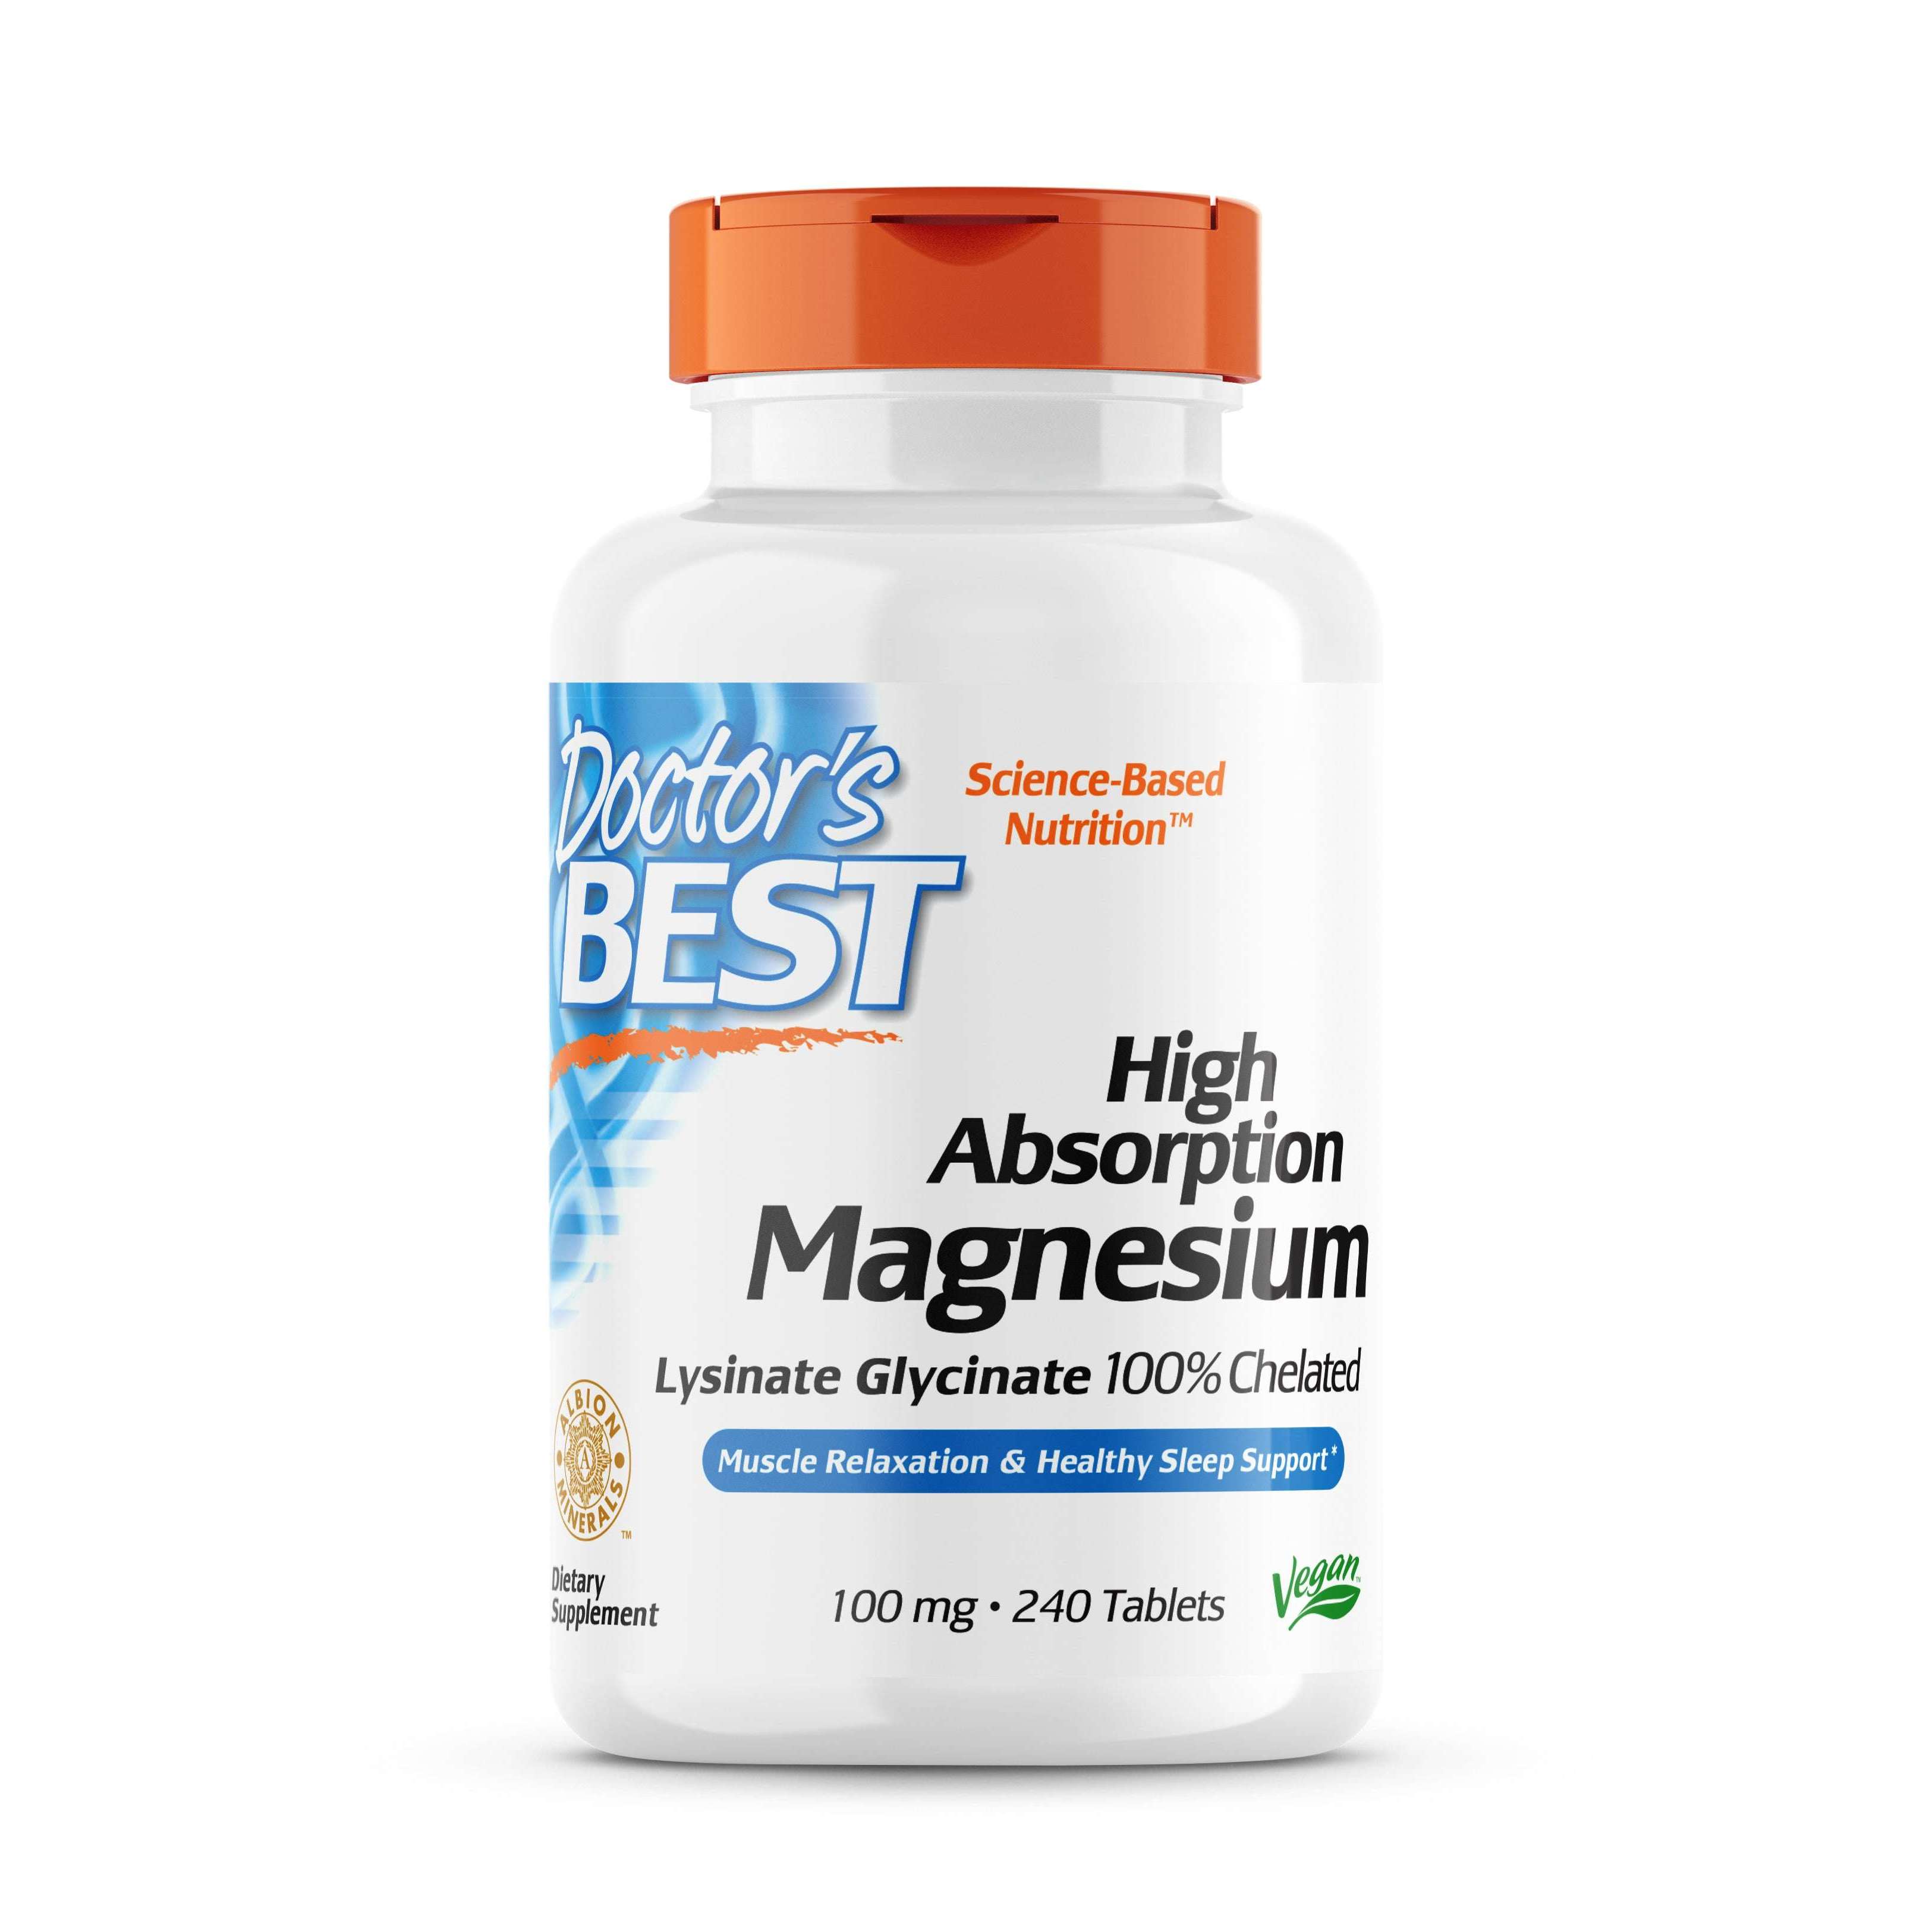 Doctor's Best High Absorption Magnesium